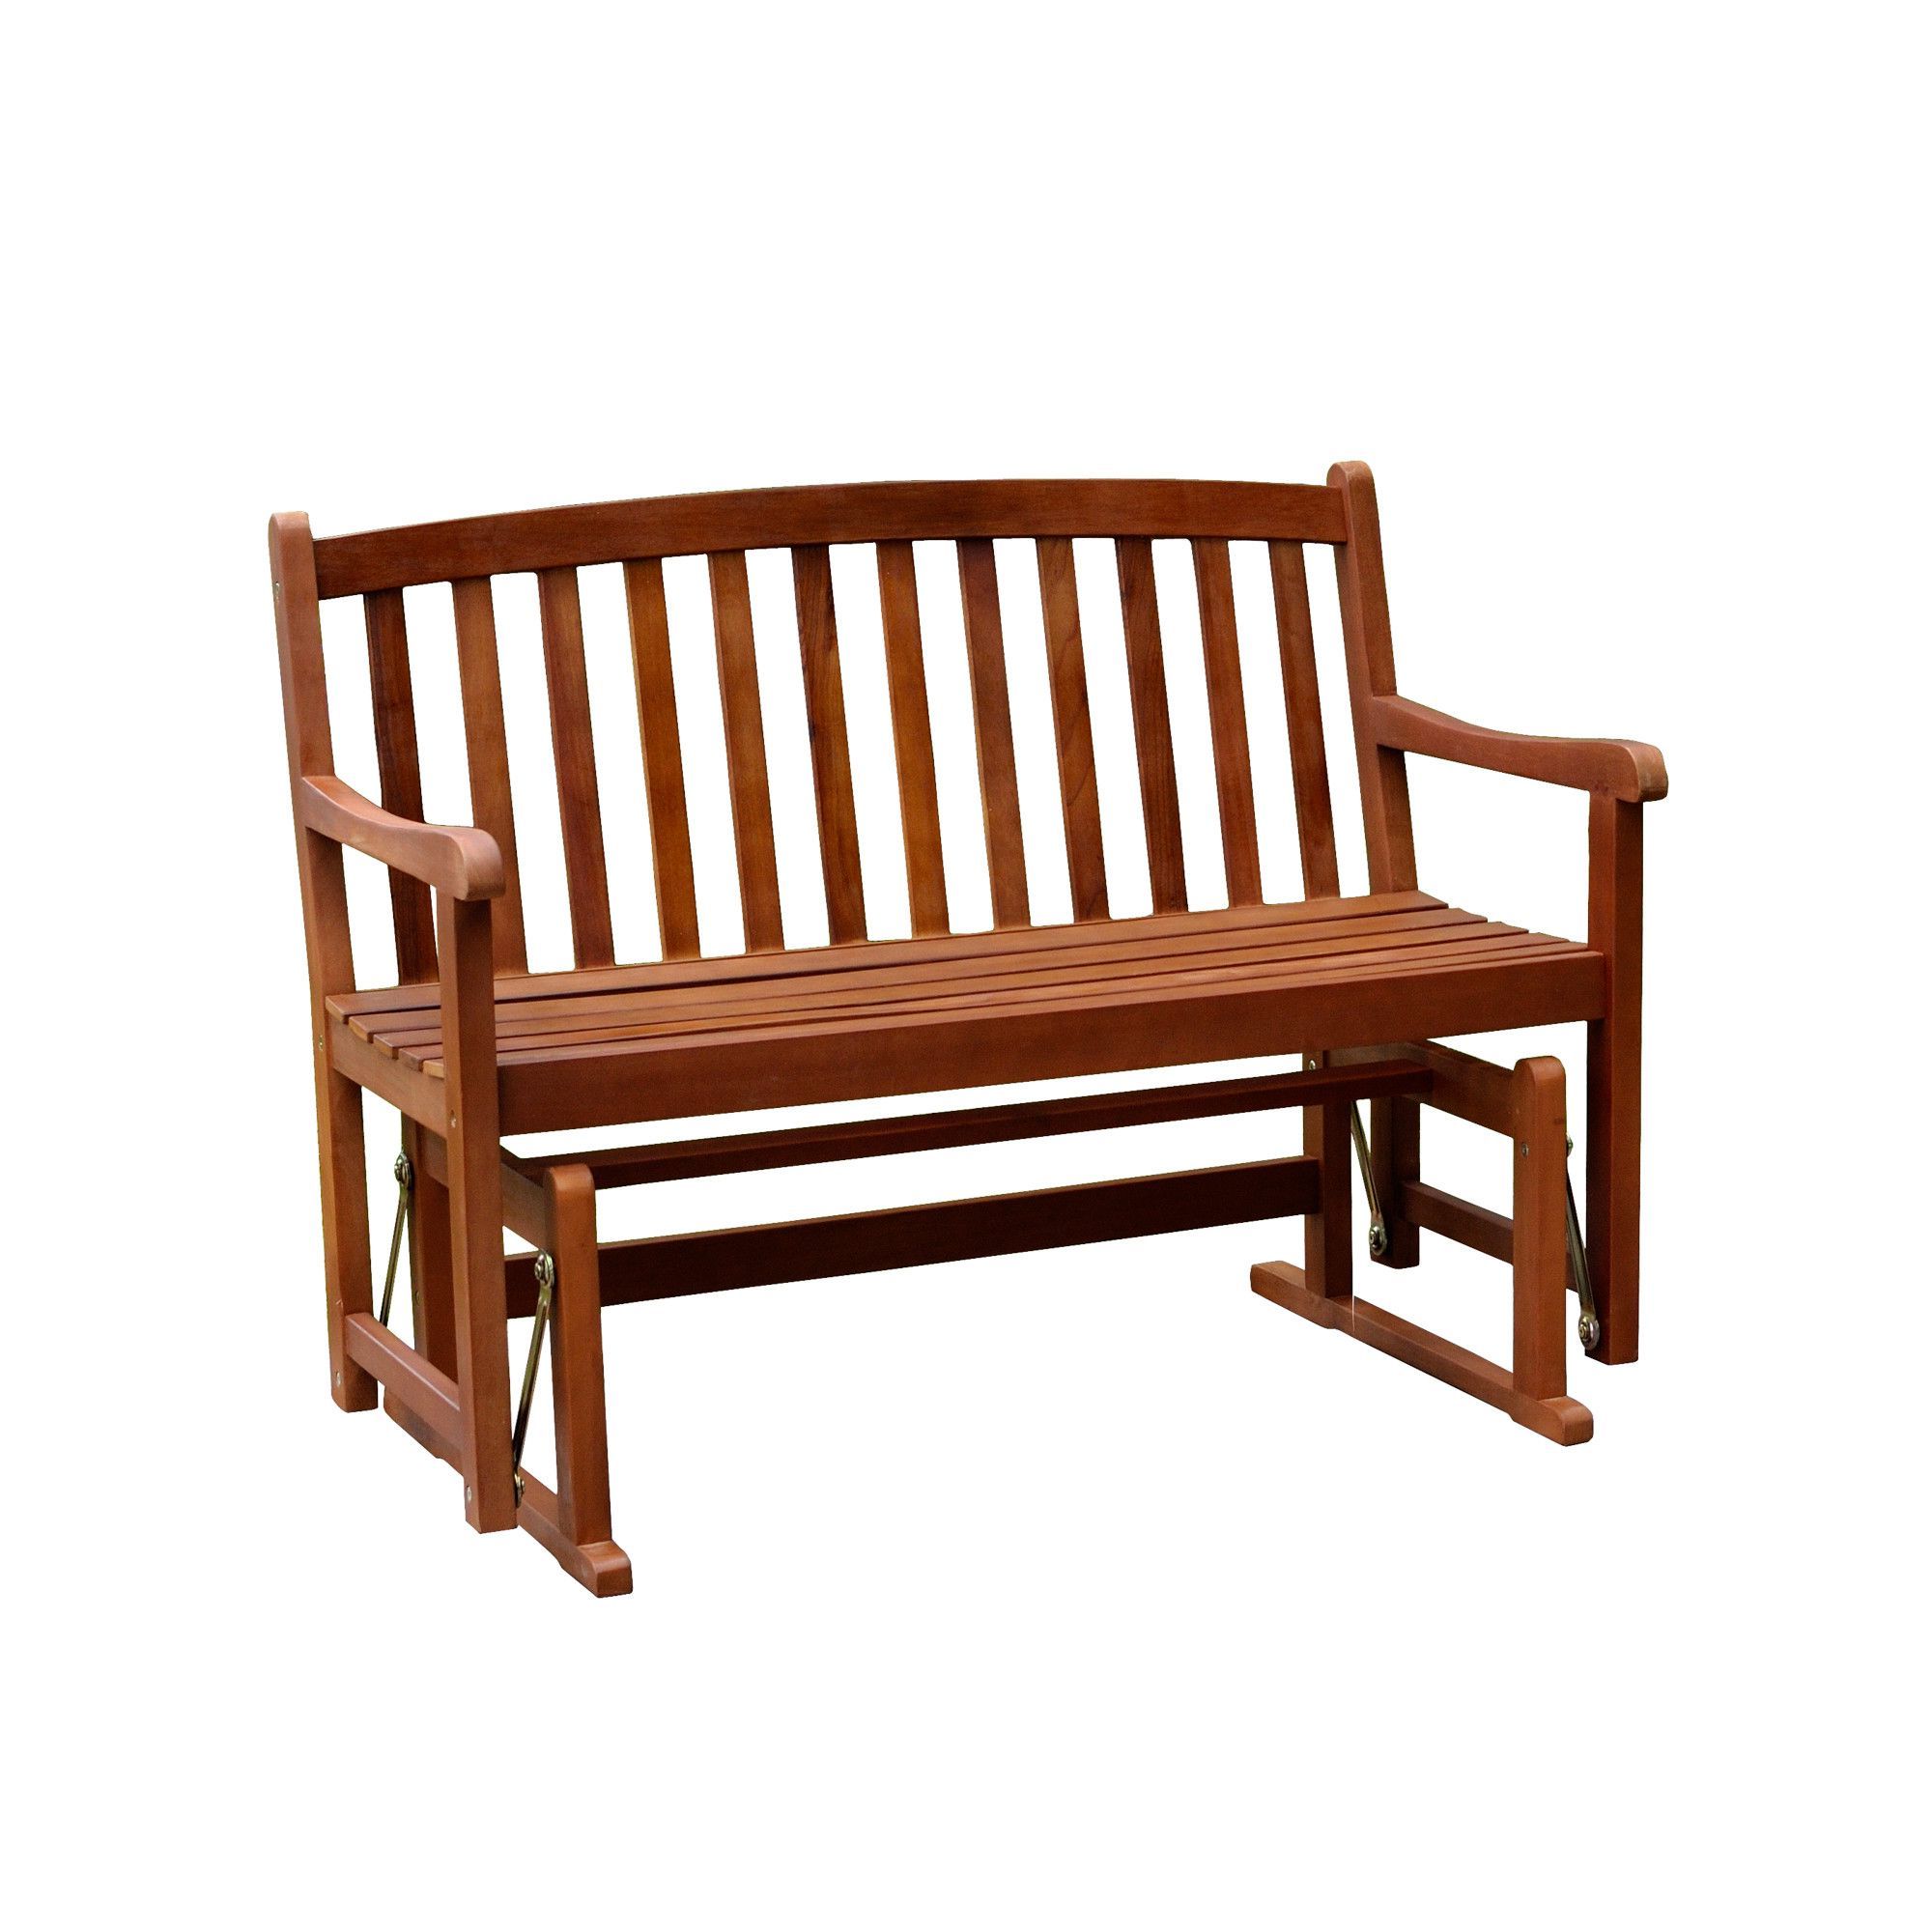 Most Recently Released Wayfair Outdoor Wooden Benches Intended For Pettit Steel Garden Benches (View 22 of 30)